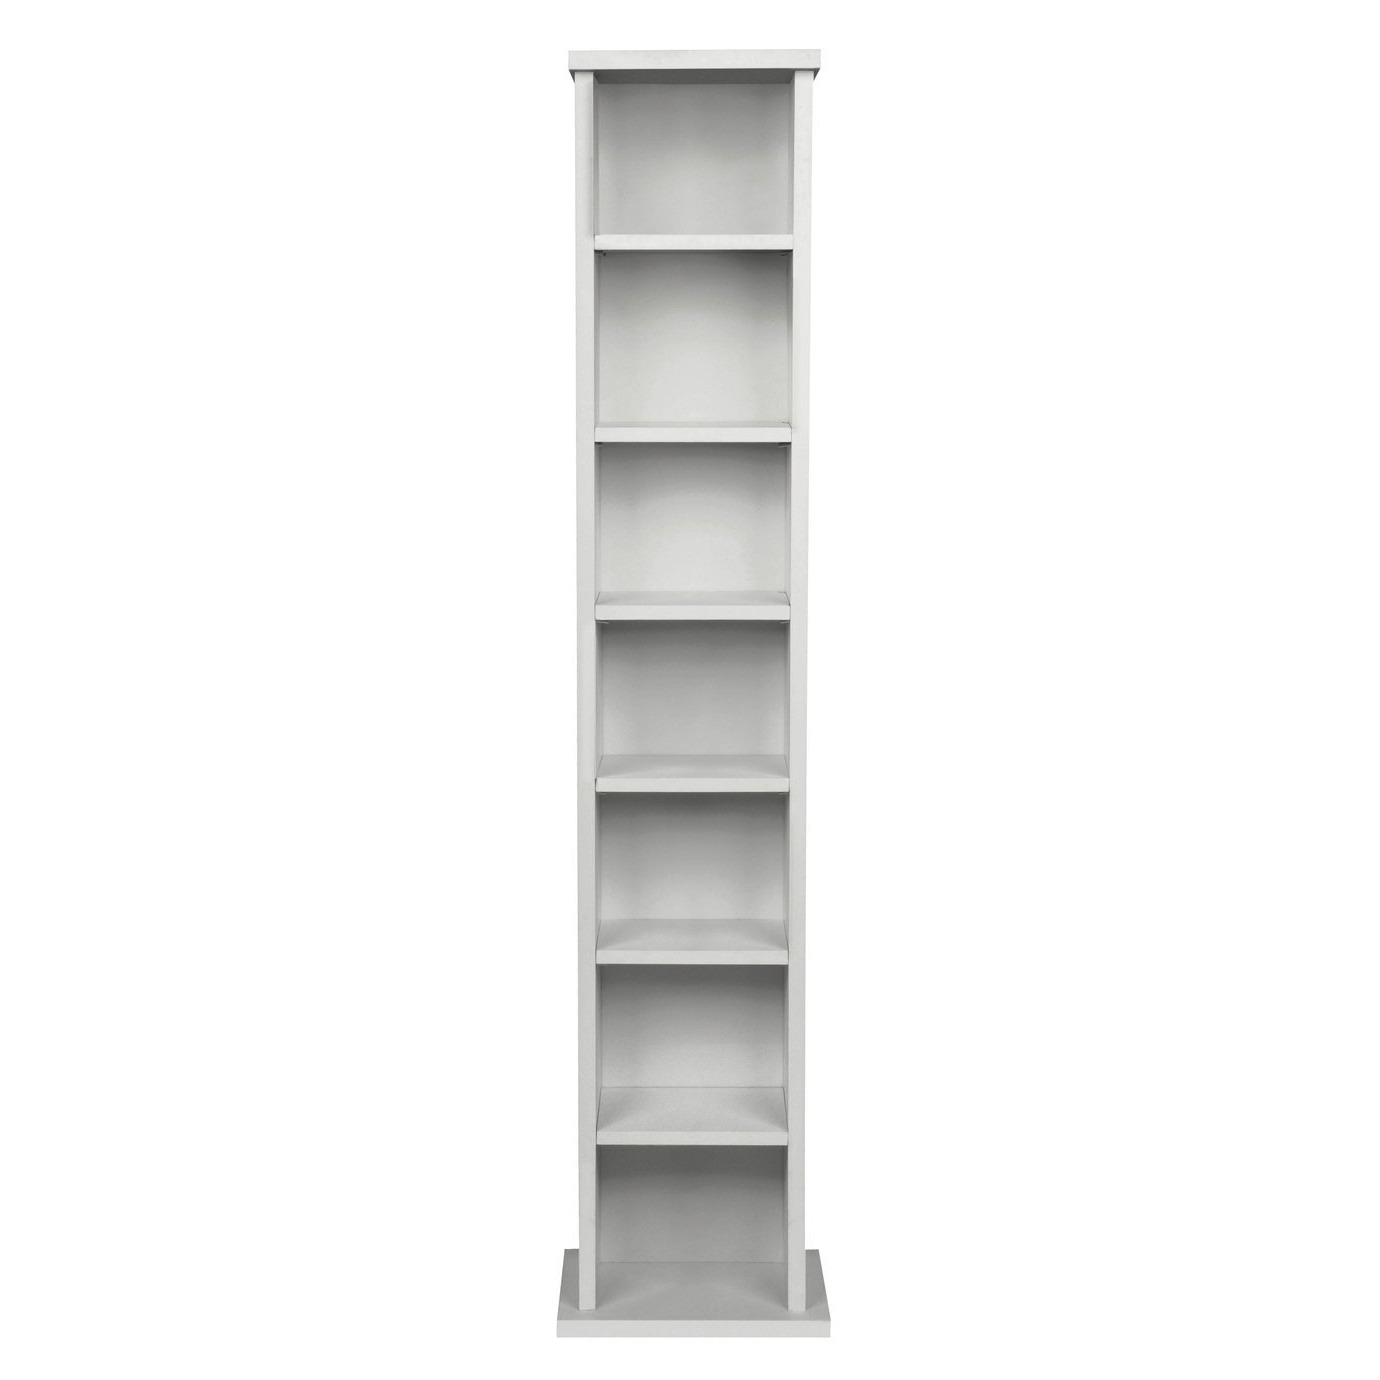 Argos Home Maine CD and DVD Storage unit - White wood effect - image 1